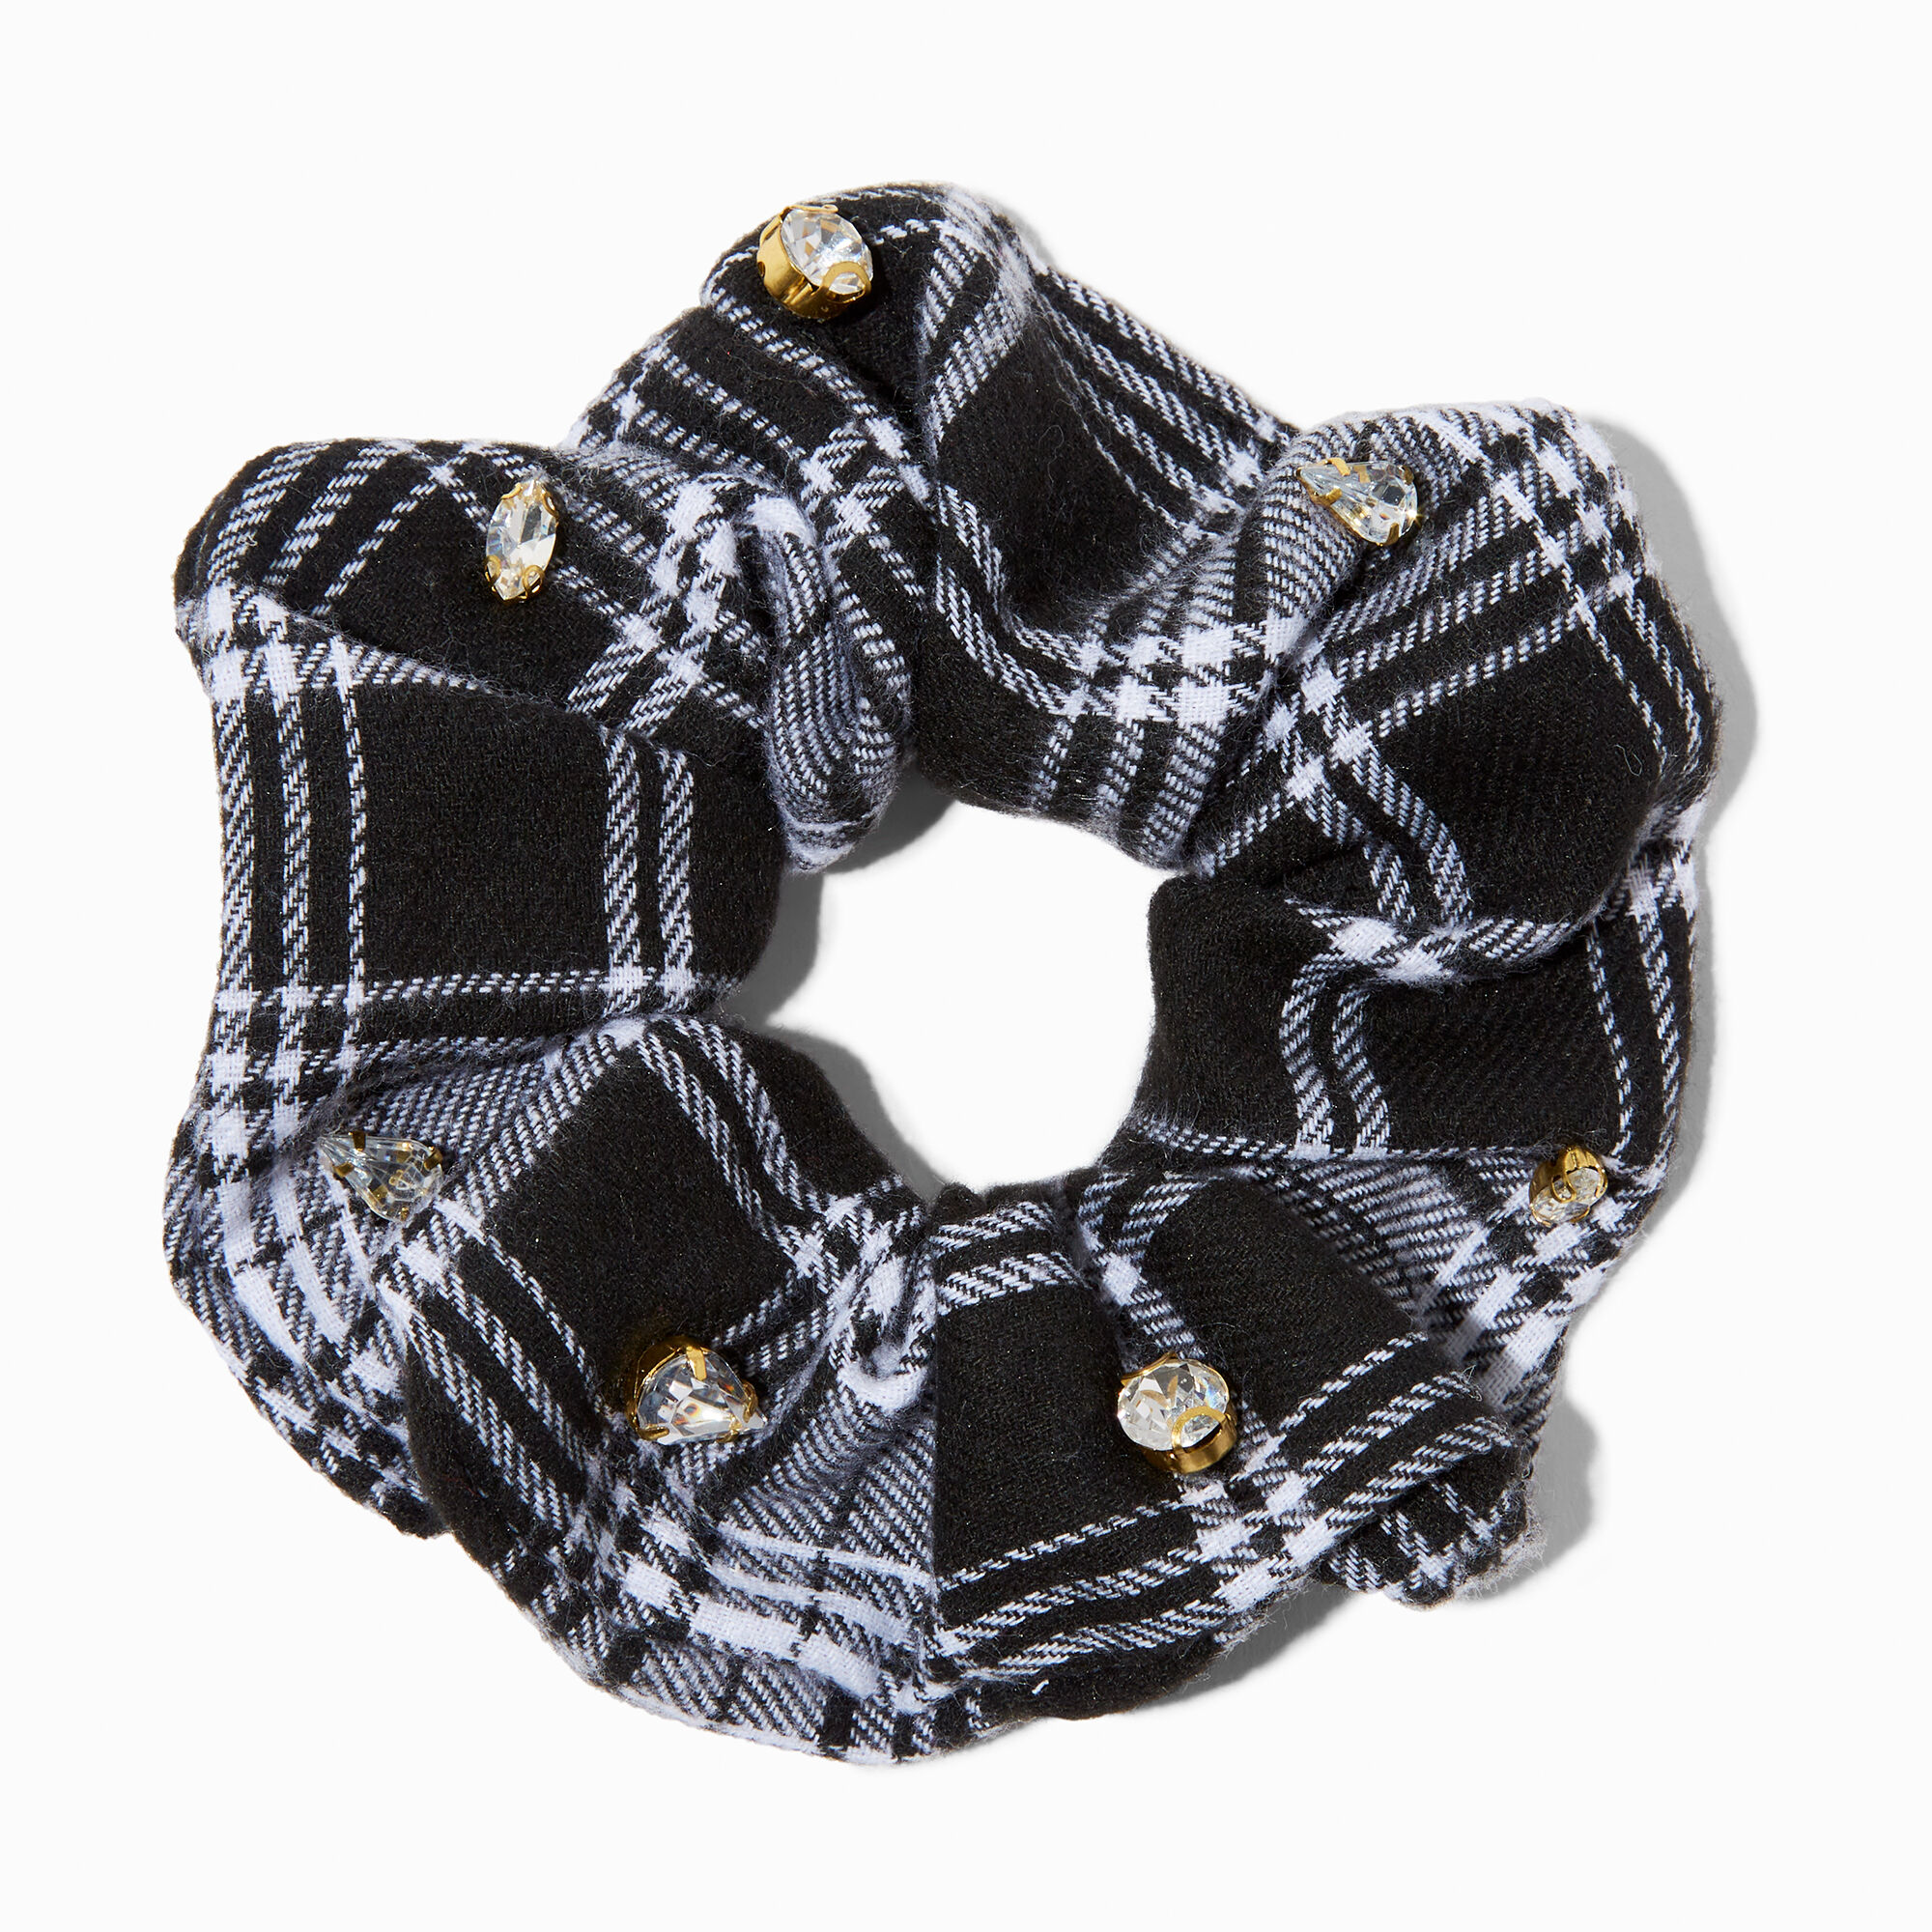 View Claires Plaid Crystal Embellished Hair Scrunchie Black information